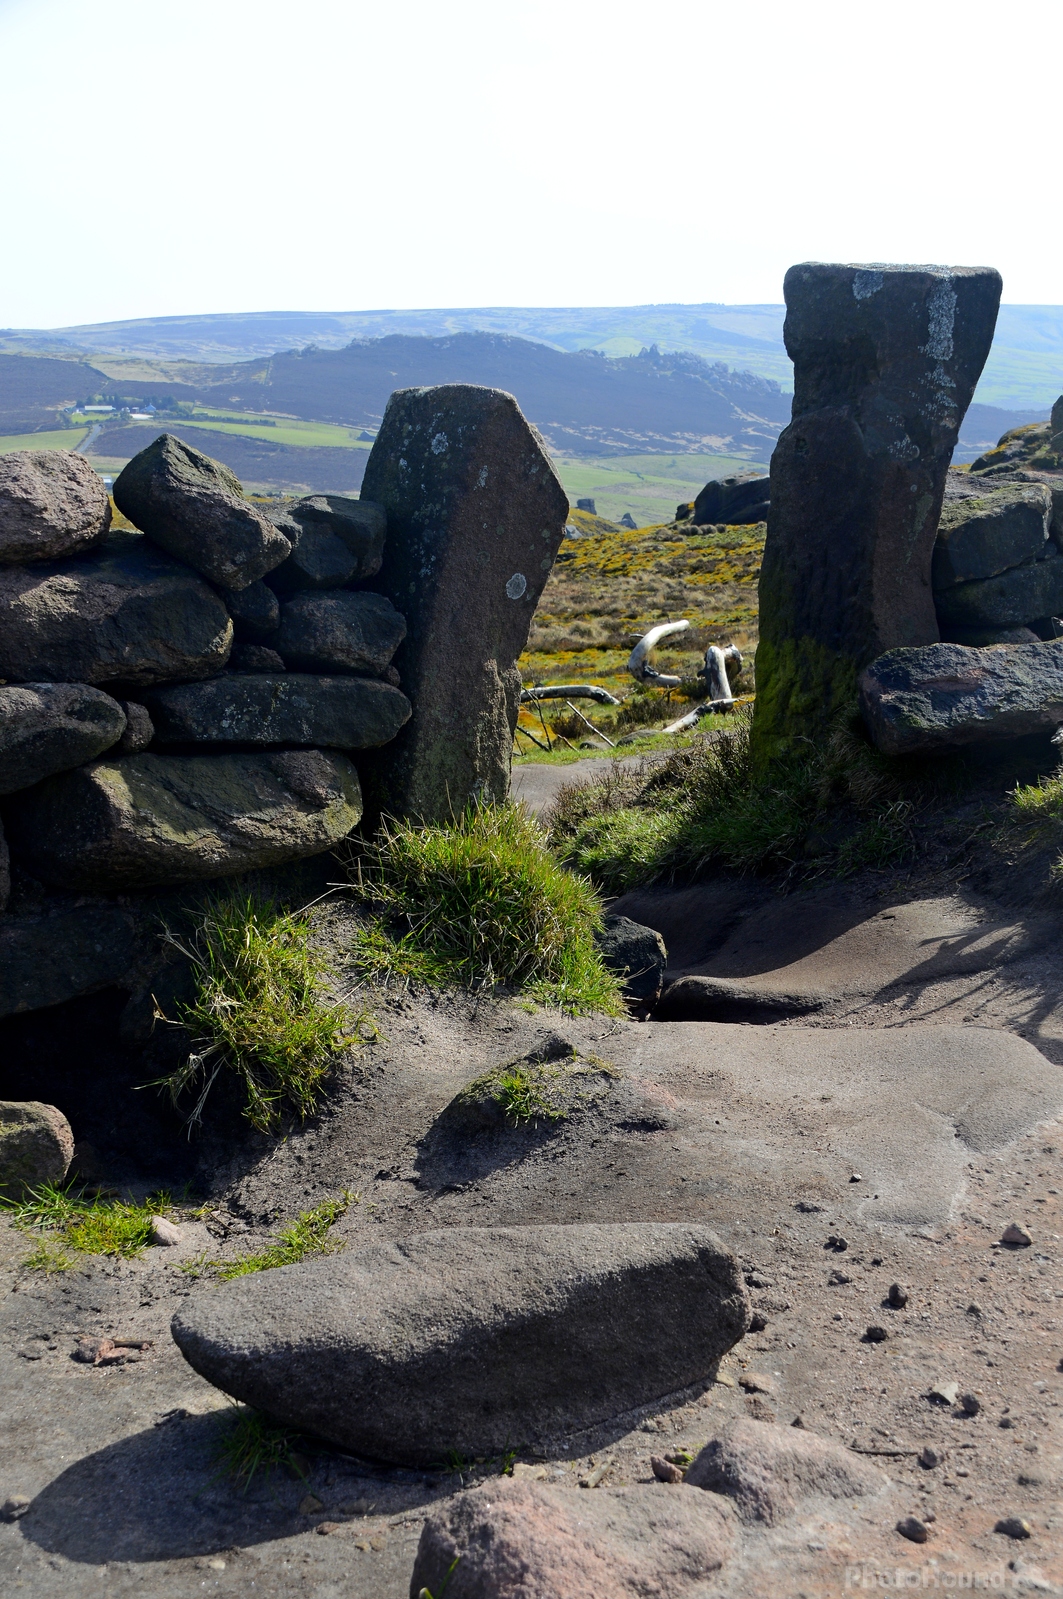 Image of The Roaches by Philip Eptlett